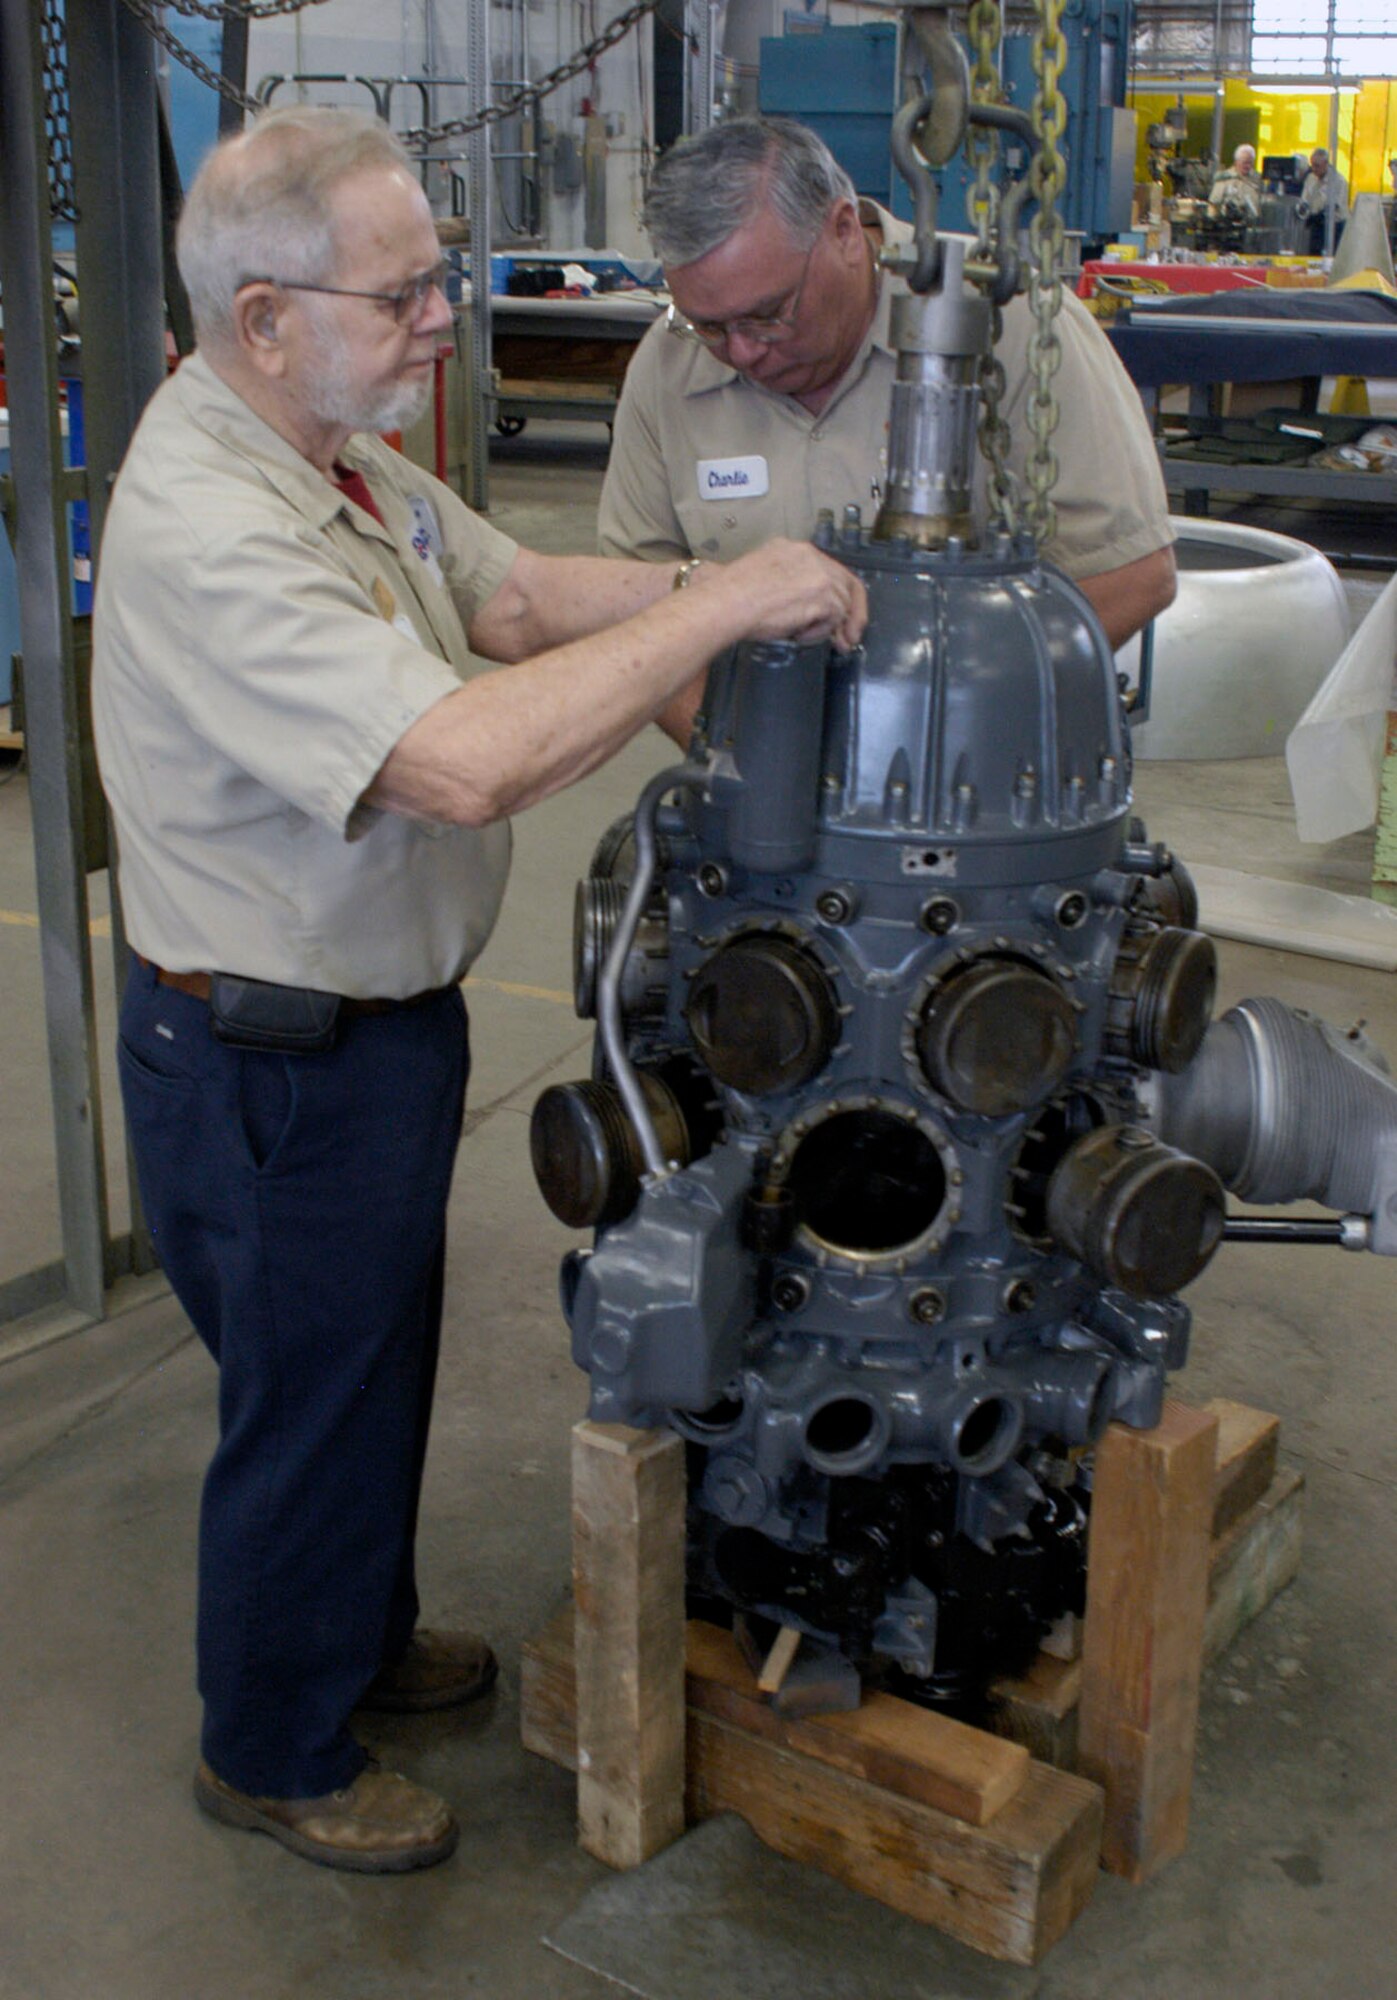 DAYTON, Ohio (03/2012) -- Charlie Leist (left) and Charlie Farlow are two of the volunteers working on the R-1535-7 engine. (U.S. Air Force photo)